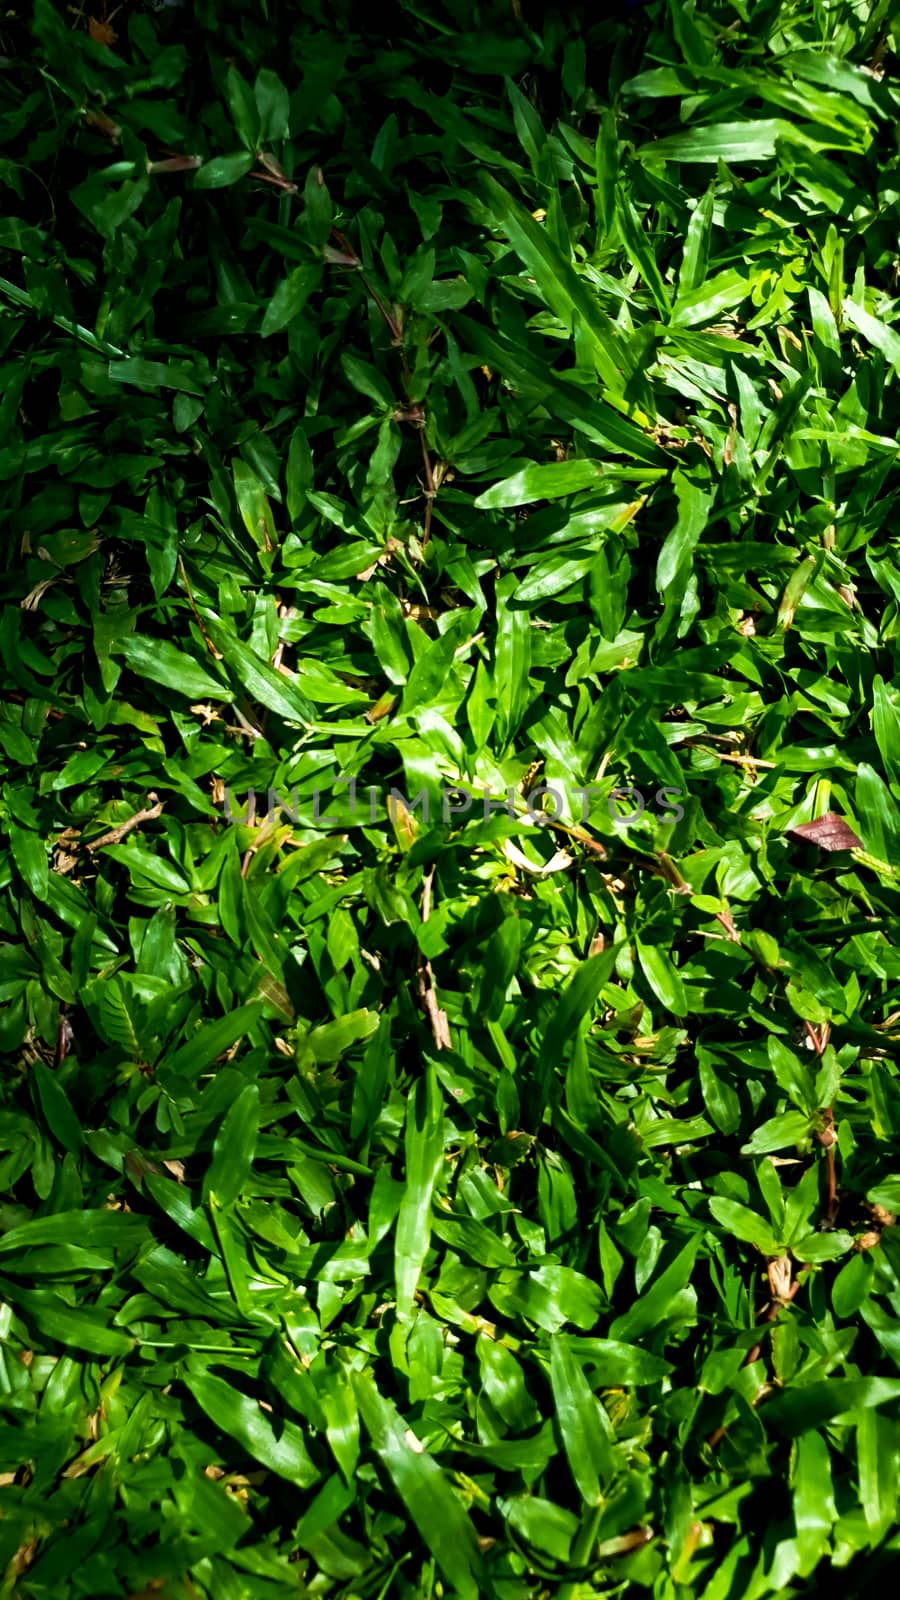 grass with some old leaf and shadow light.